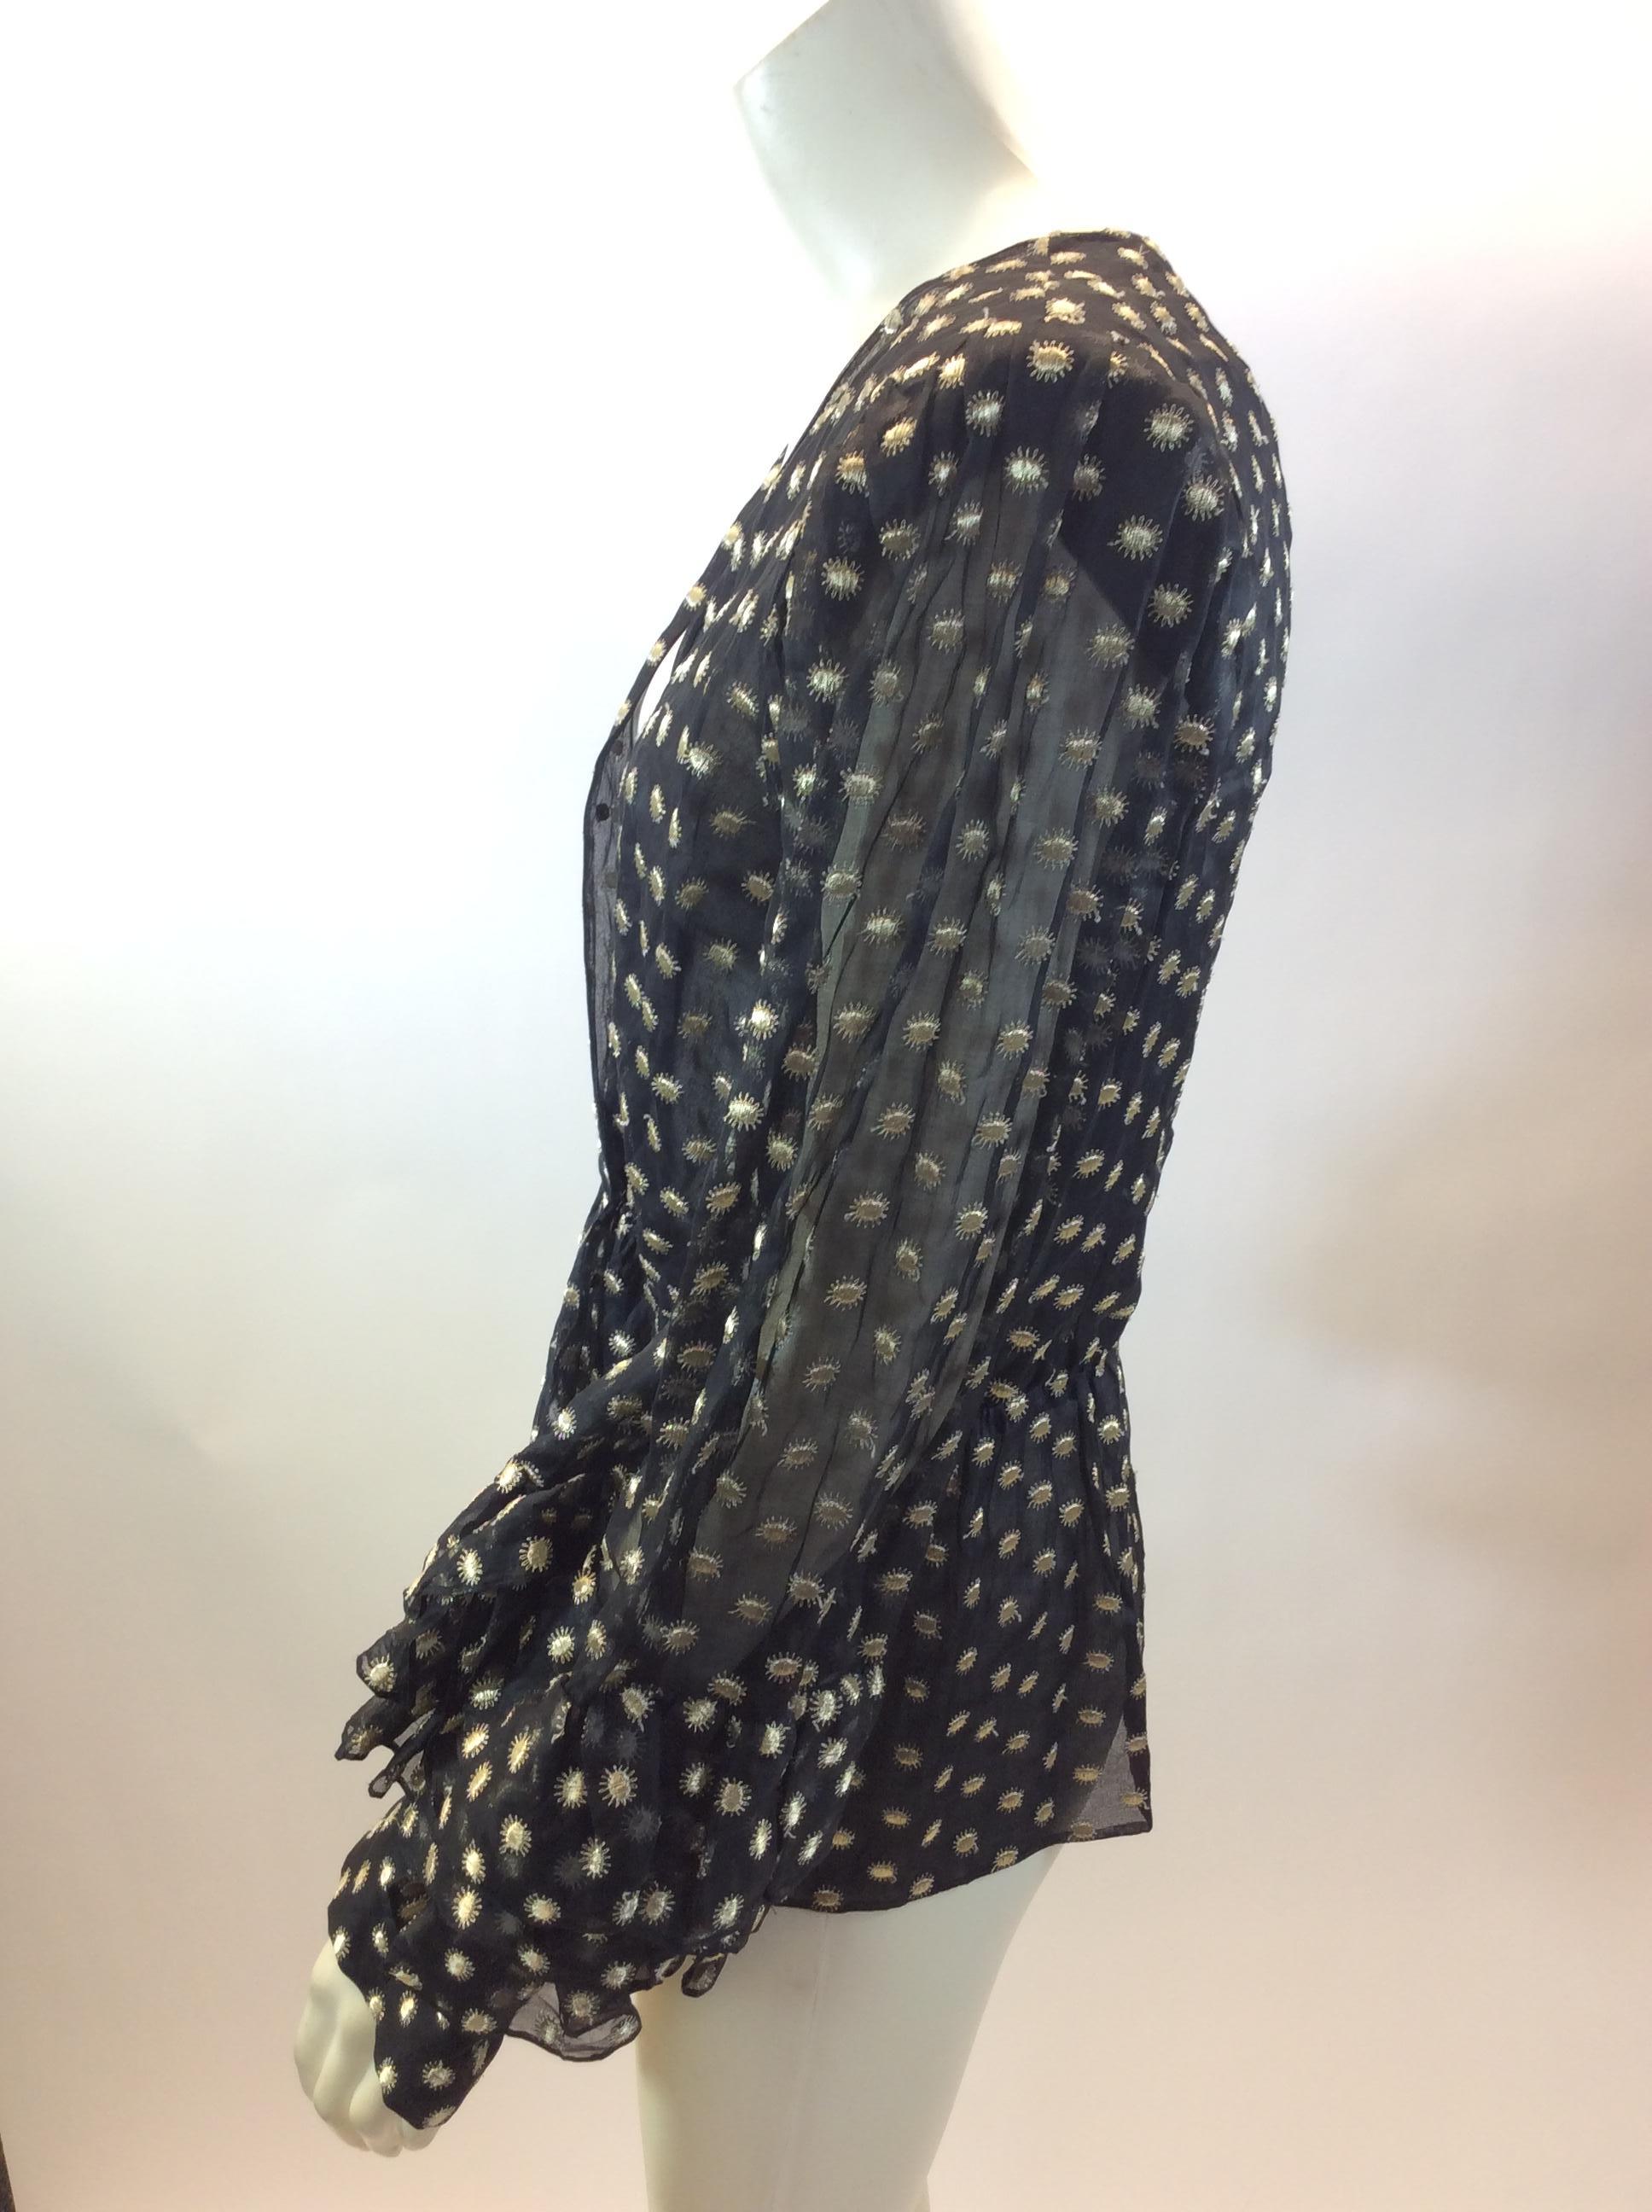 Givenchy Couture Black and Gold Print Blouse
$250
Made in France
100% Cotton
Length 24